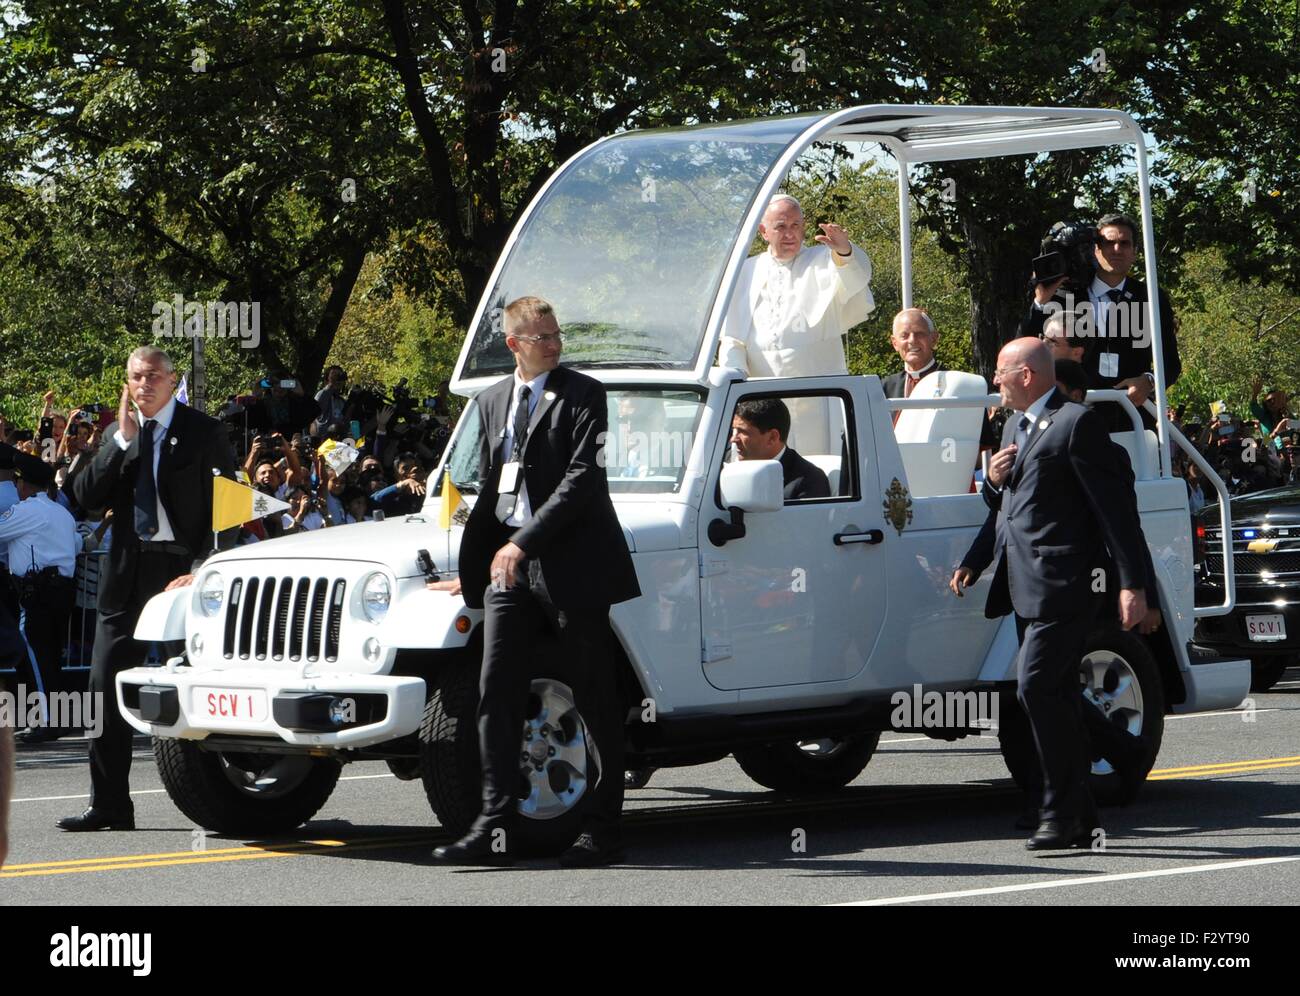 Pope Francis waves to crowds gathered for his motorcade along Pennsylvania Avenue to the Capitol September 23, 2015 in Washington, DC. This is the first visit by Pope Francis to the United States. Stock Photo